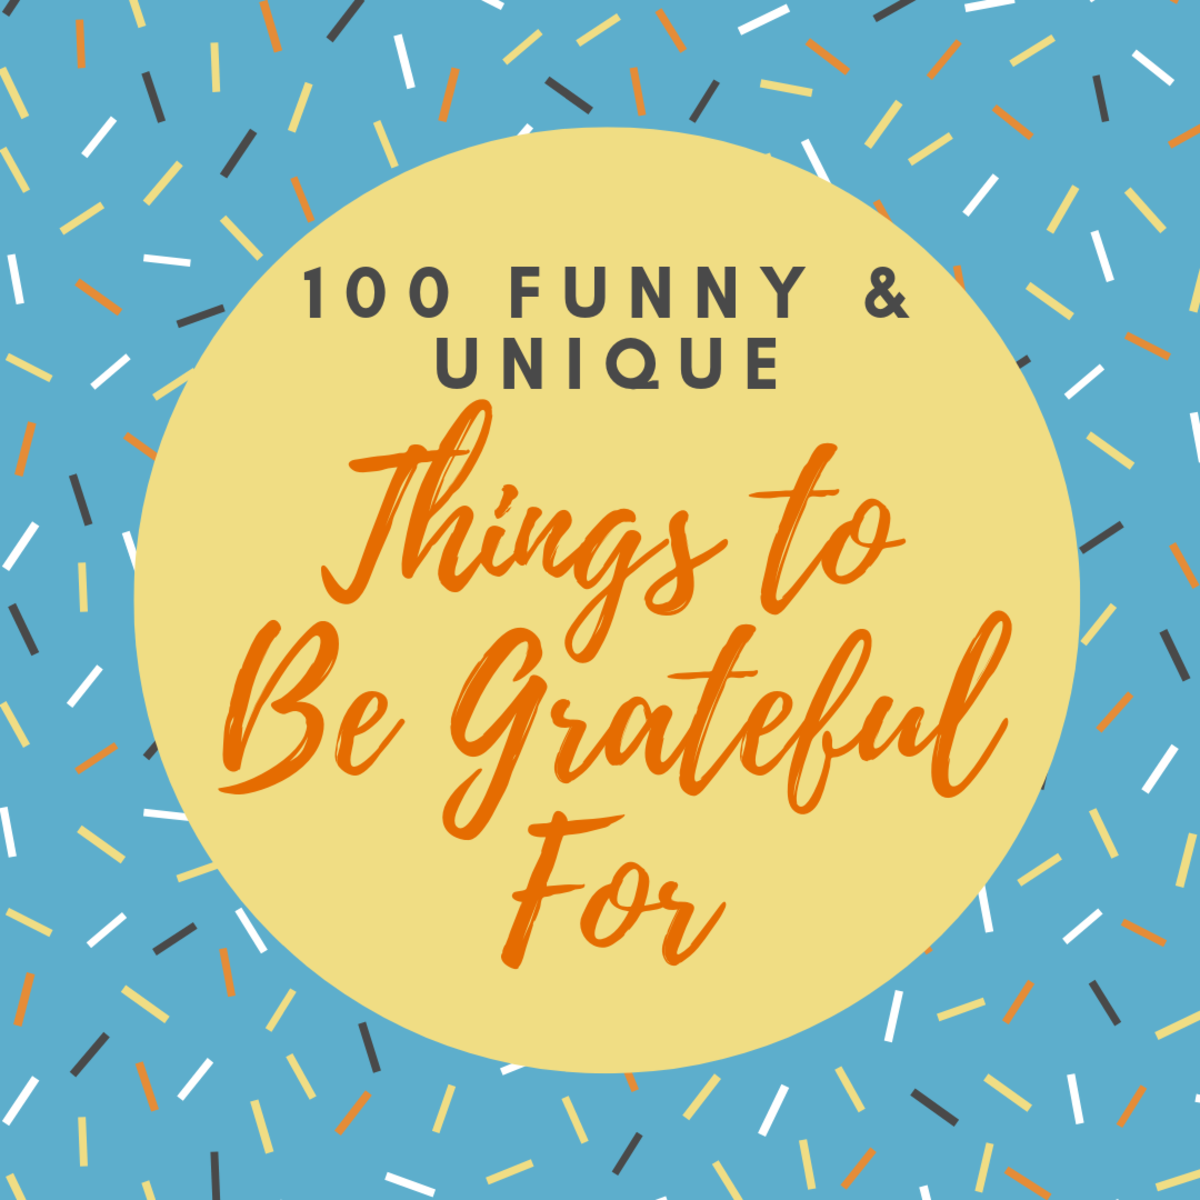 What are the unusual little things you're thankful for?